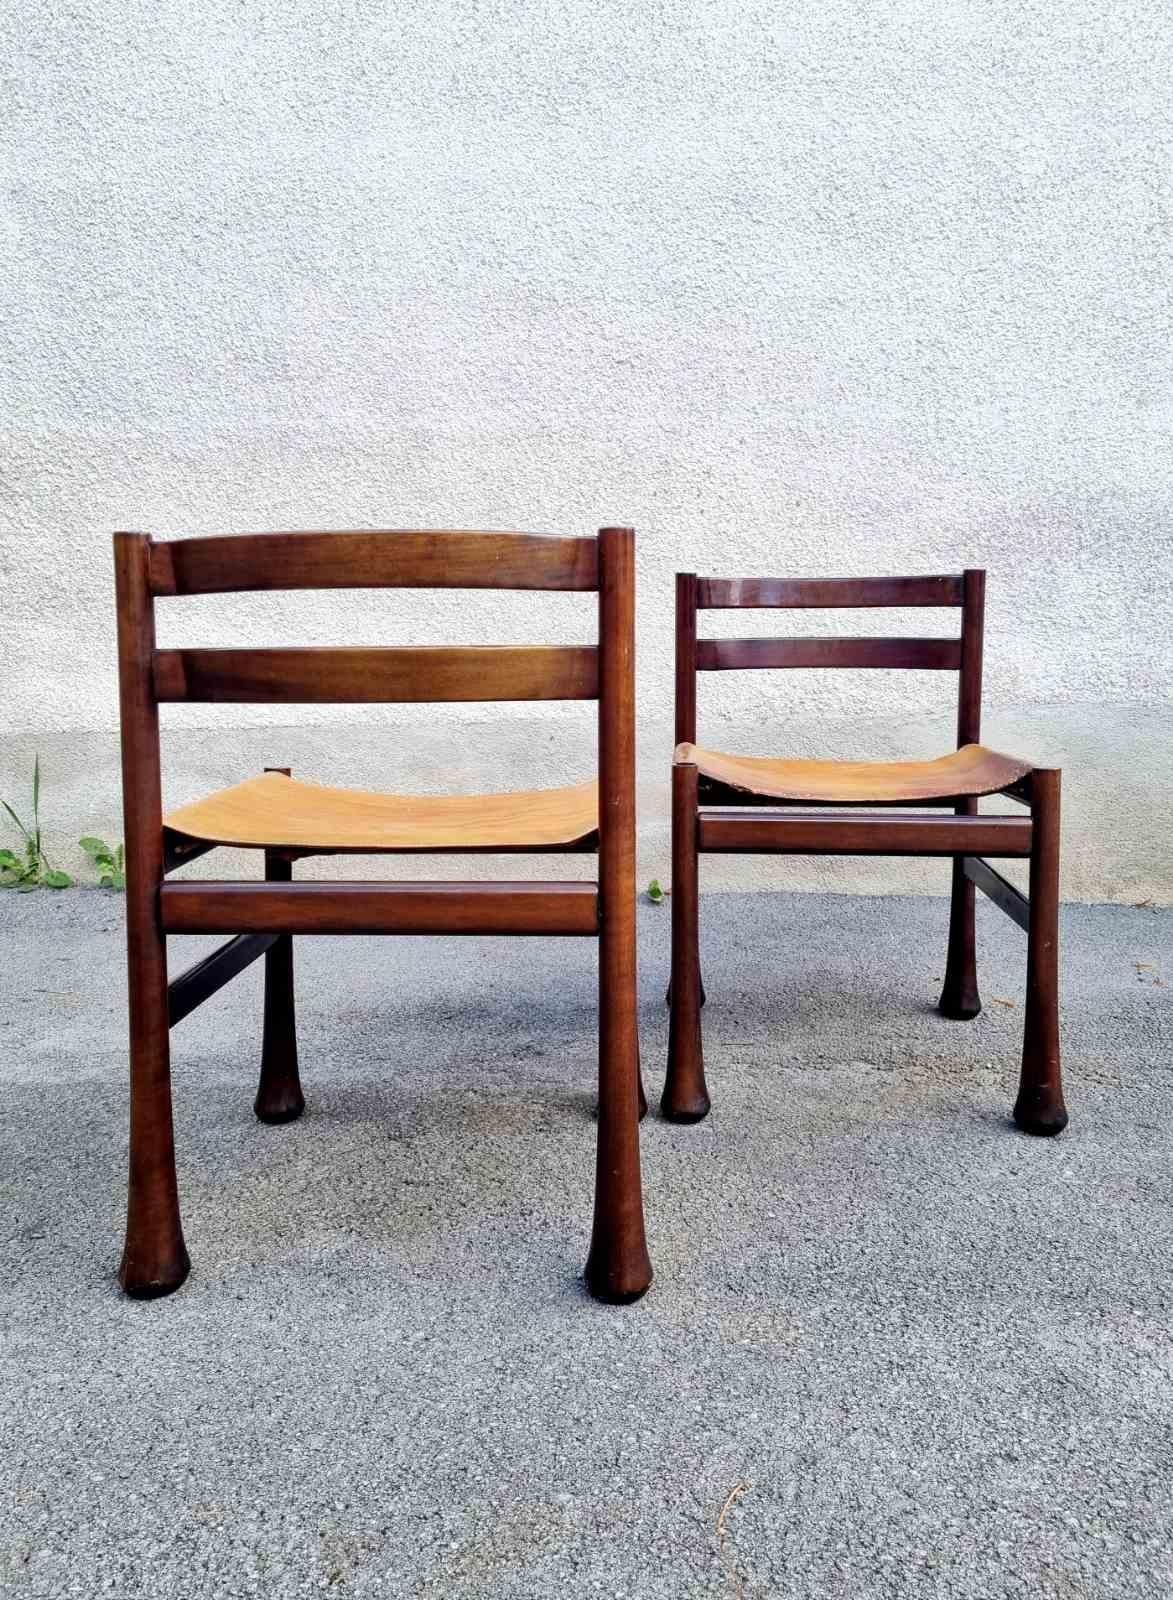 Italian Modern Rosewood and Leather Dining Chairs, Design Luciano Frigerio, 70s For Sale 2